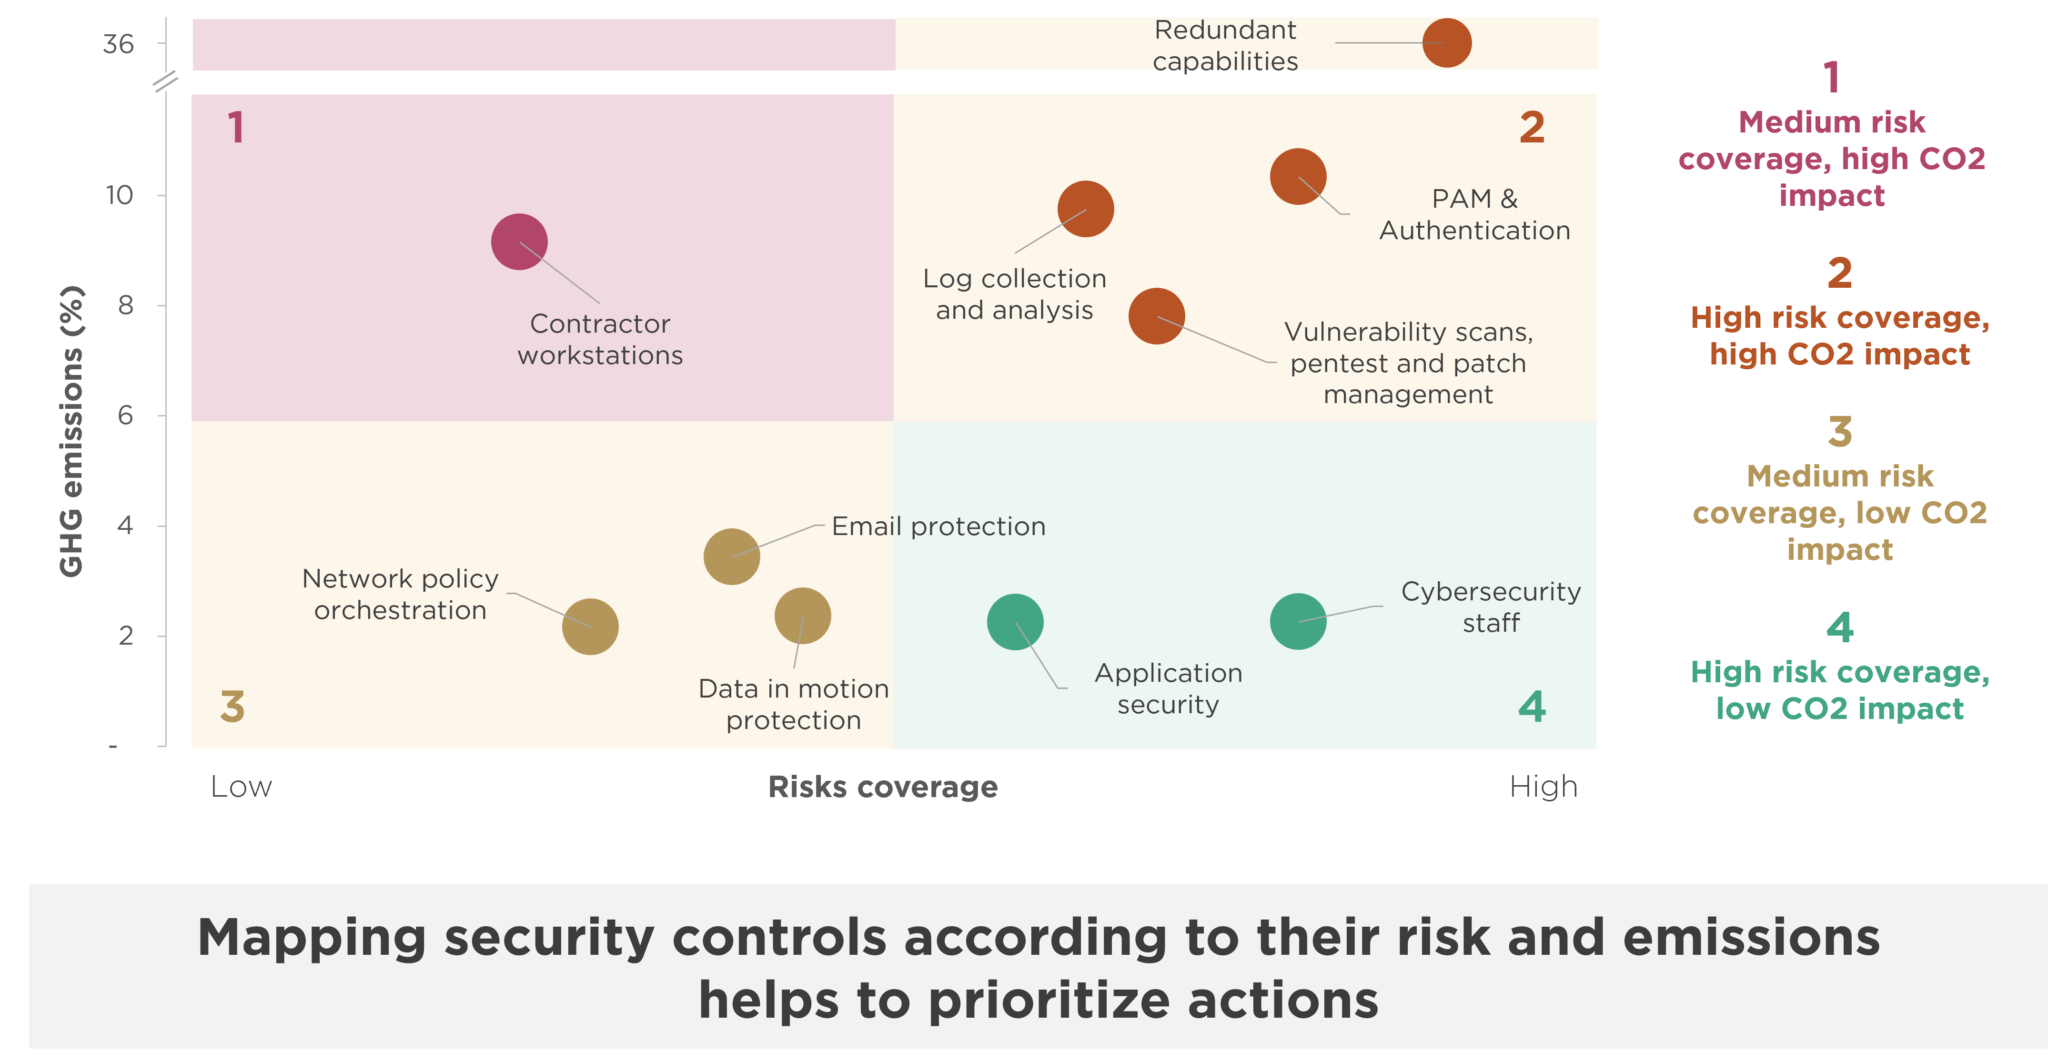 Mapping security controls according to their risk and emissions helps to prioritize actions